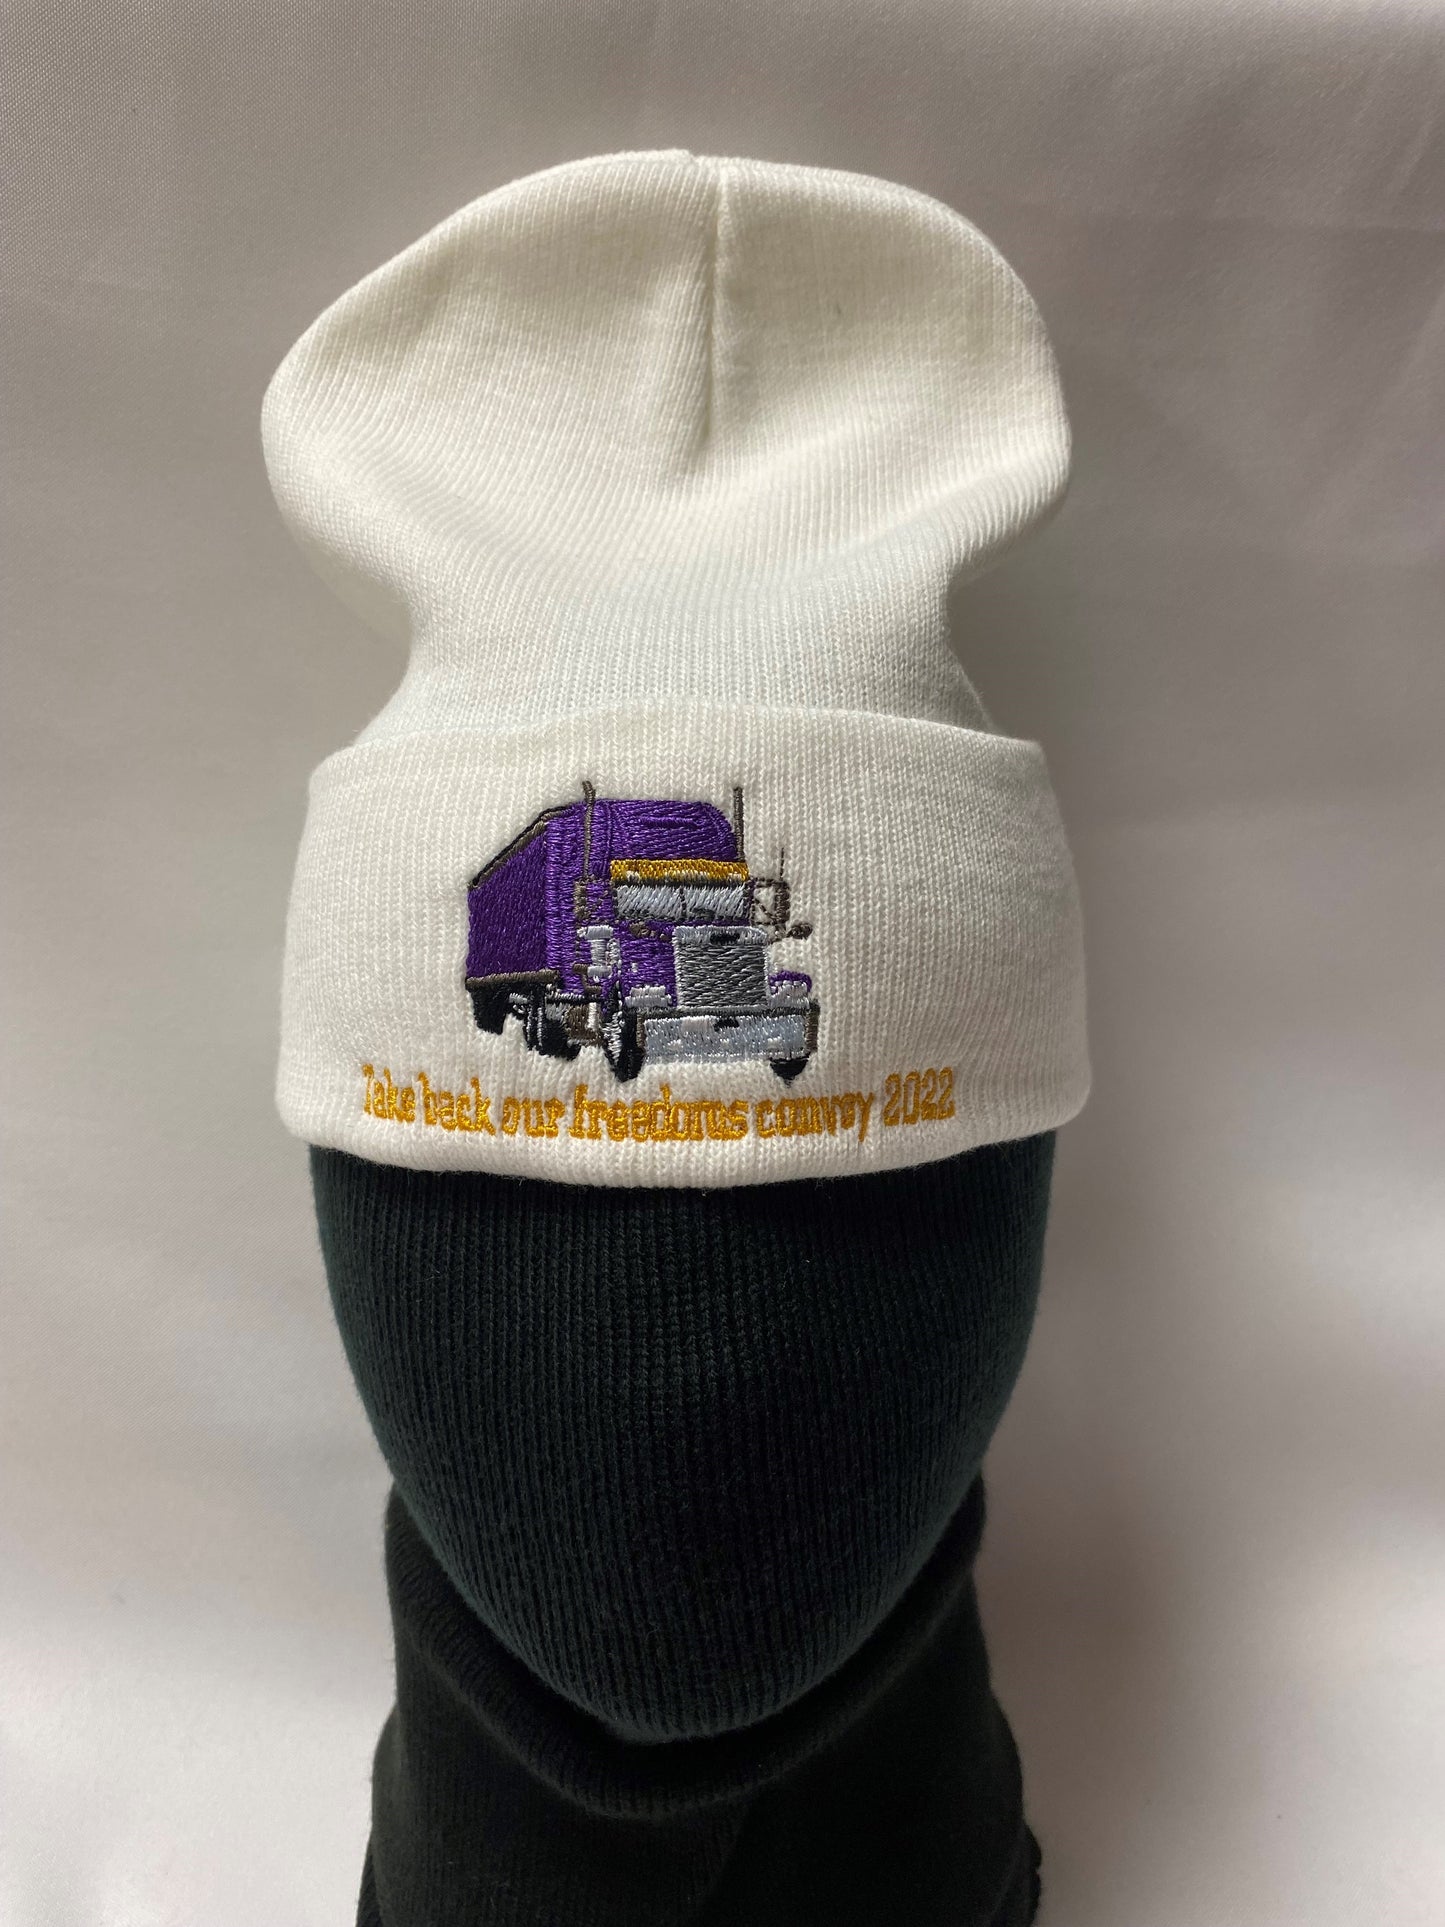 TRUCKER TOQUE white: "Take back our freedoms convoy 2022"